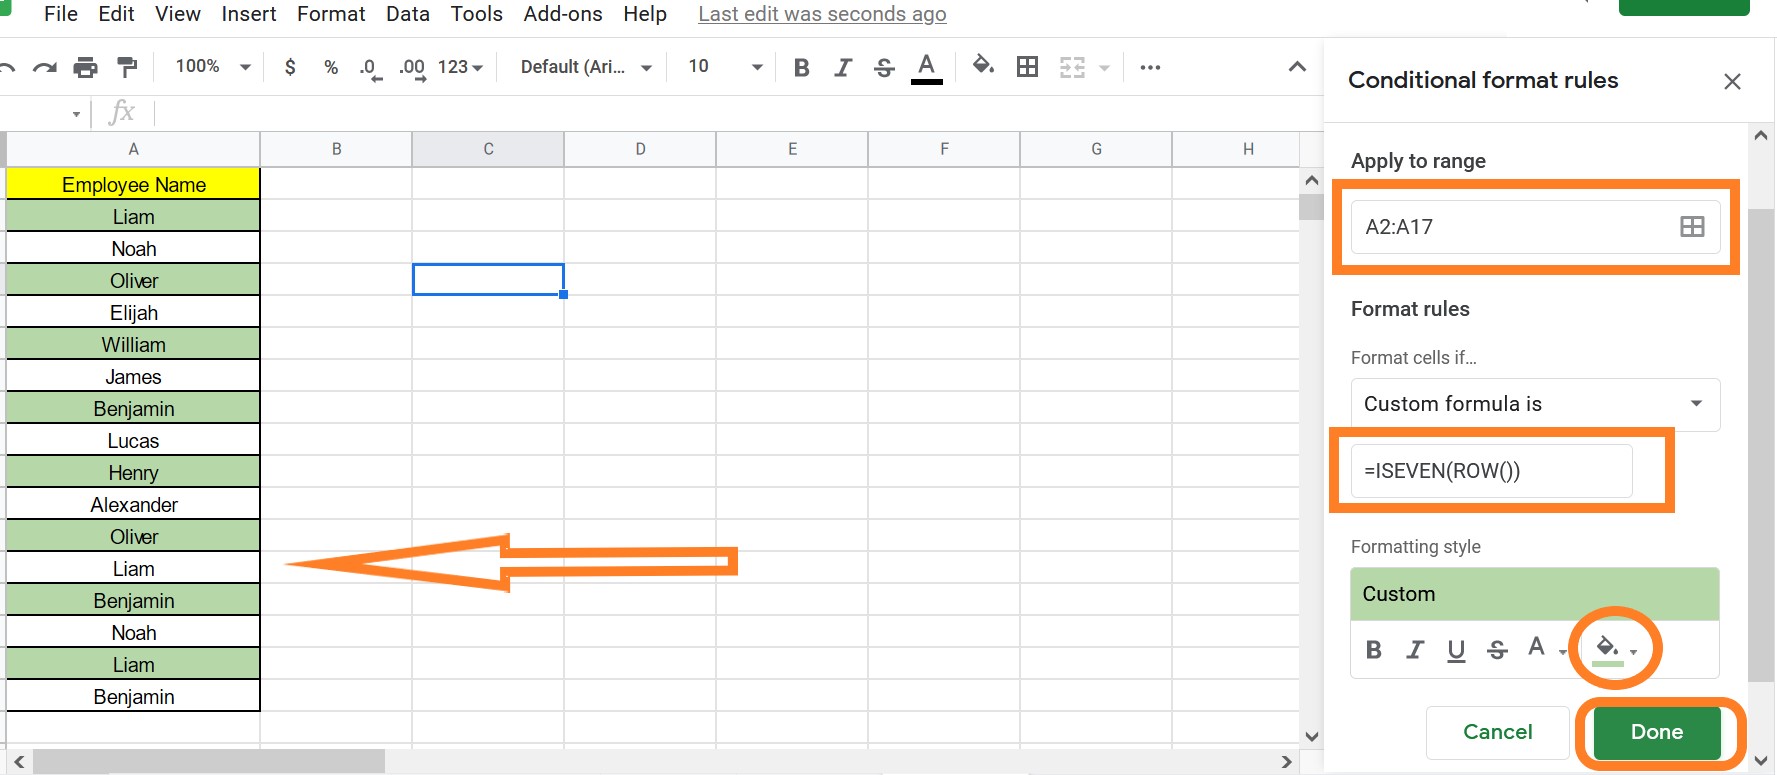 How to Color Alternate Rows in Google Sheets